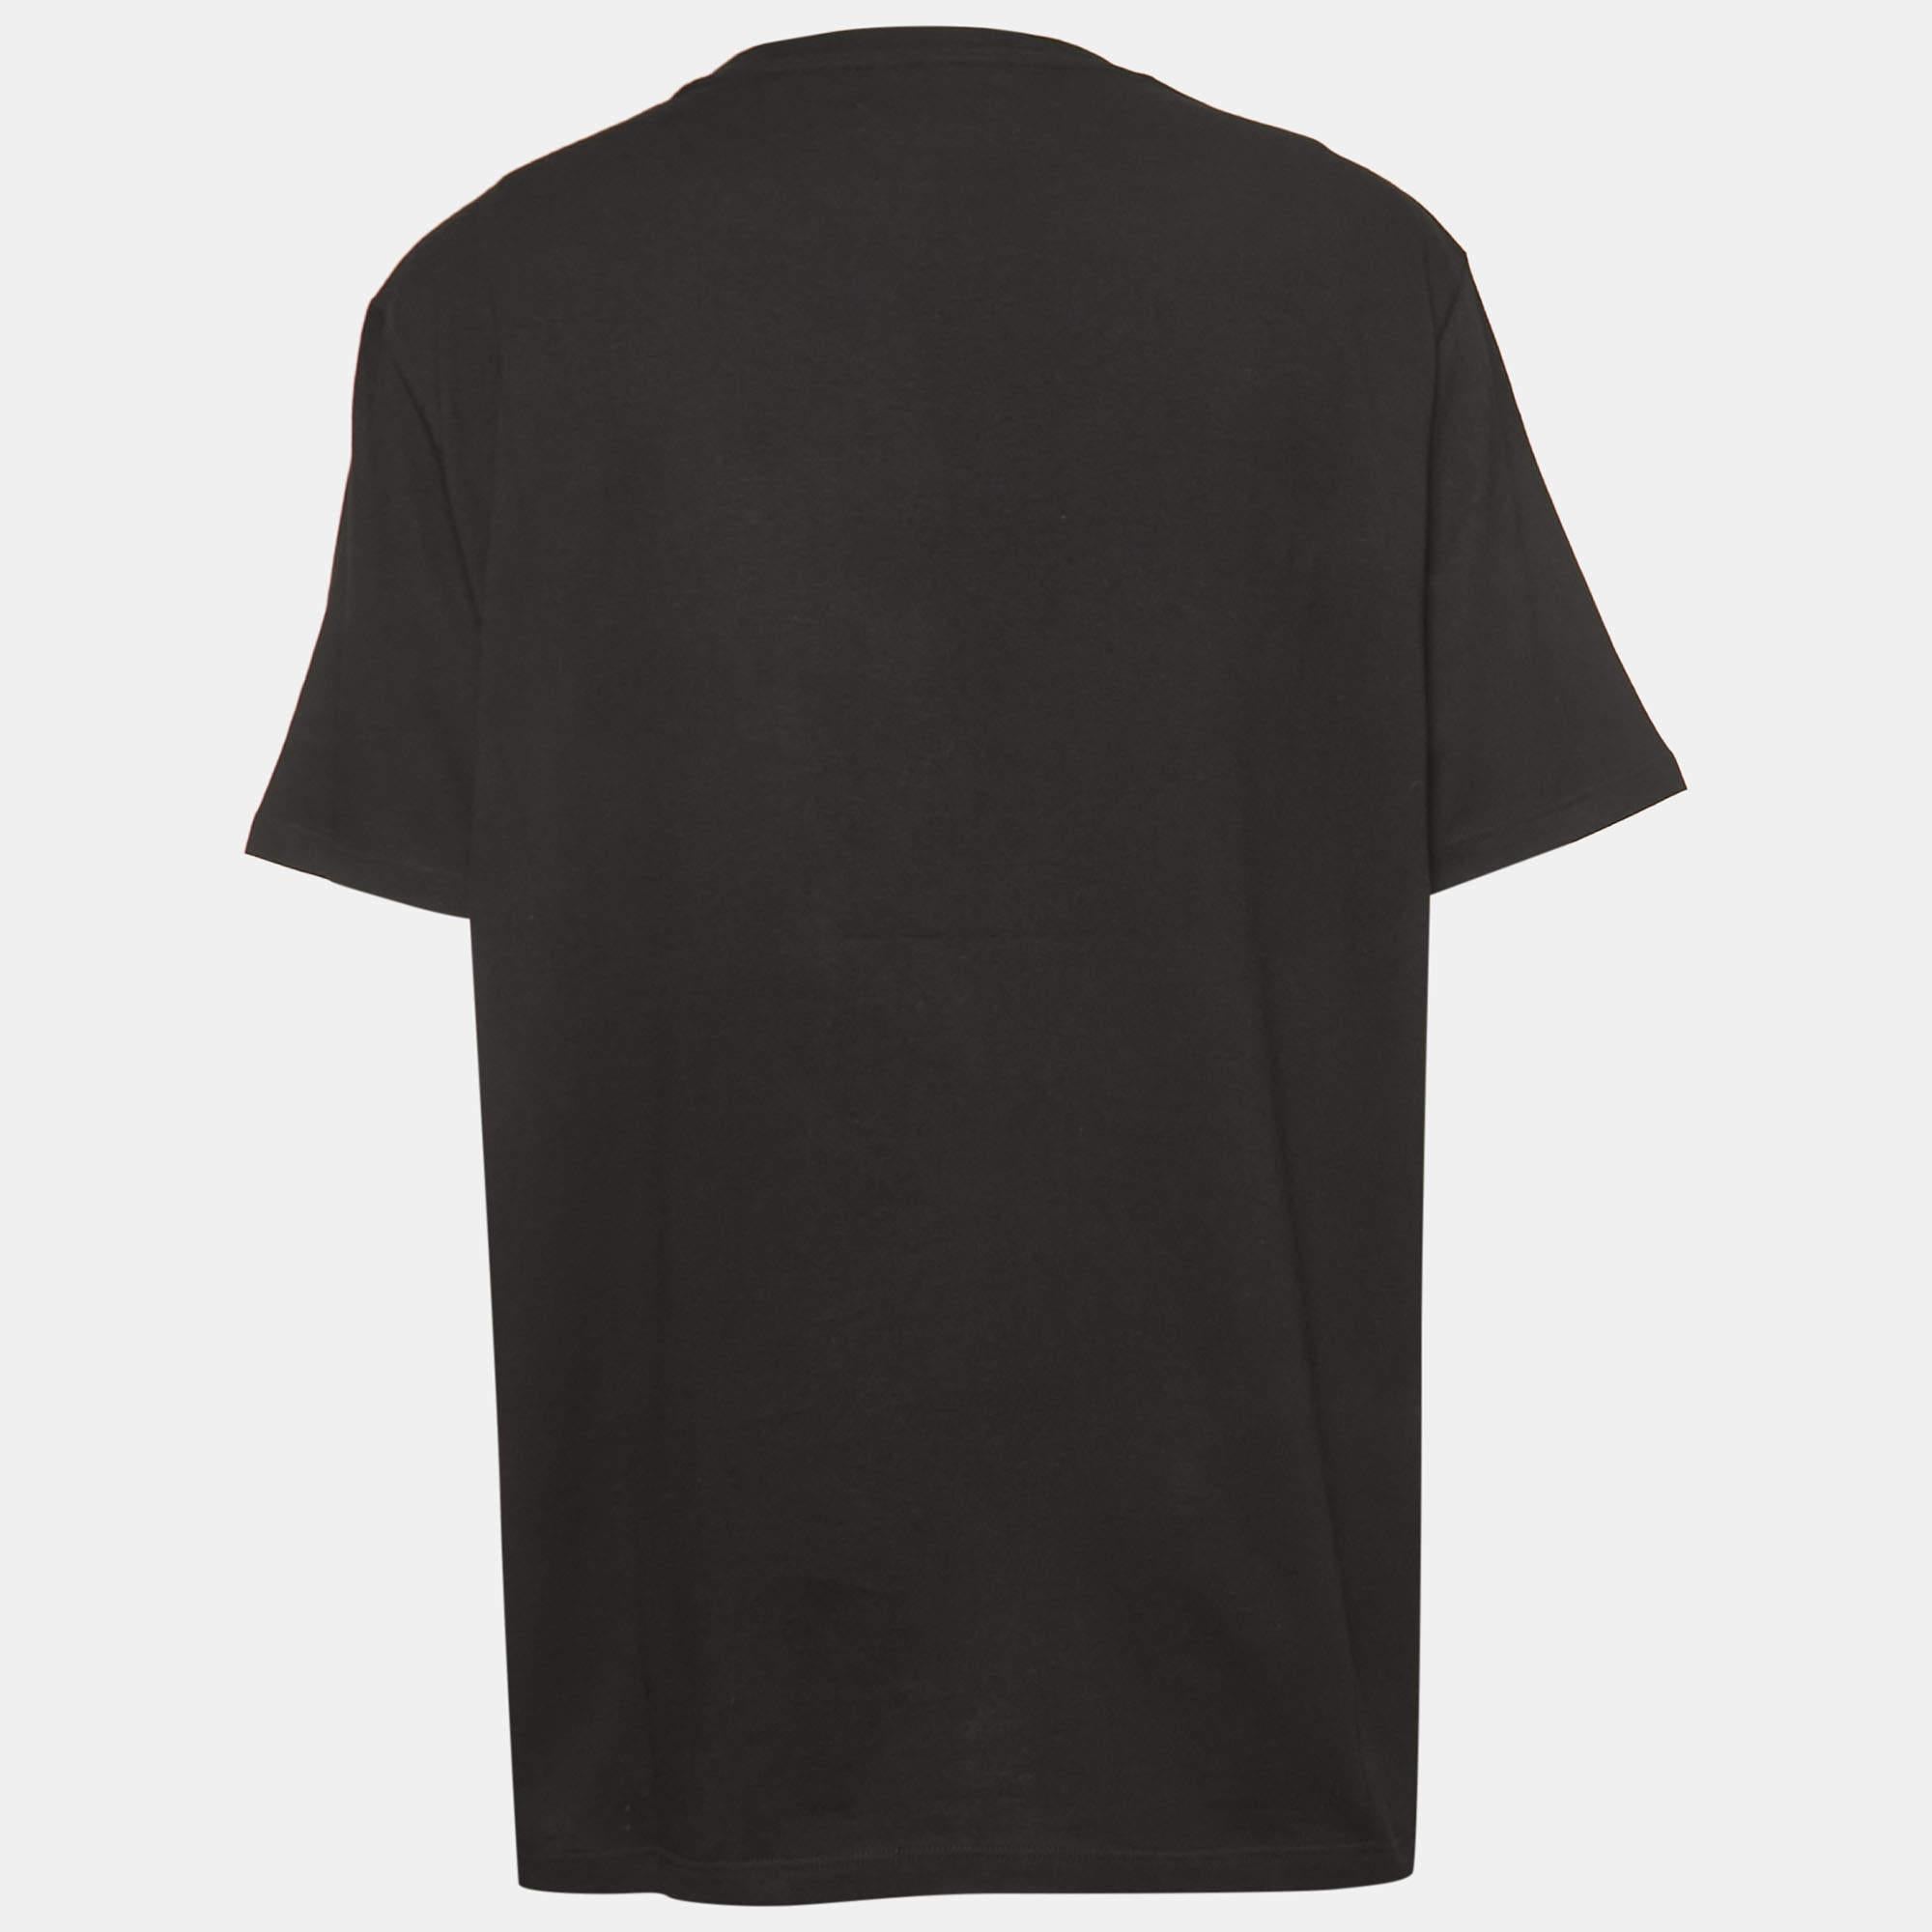 Get the comfort and the right casual style with this designer T-shirt. Designed to be reliable and durable, the creation has a simple neckline and signature detailing.

